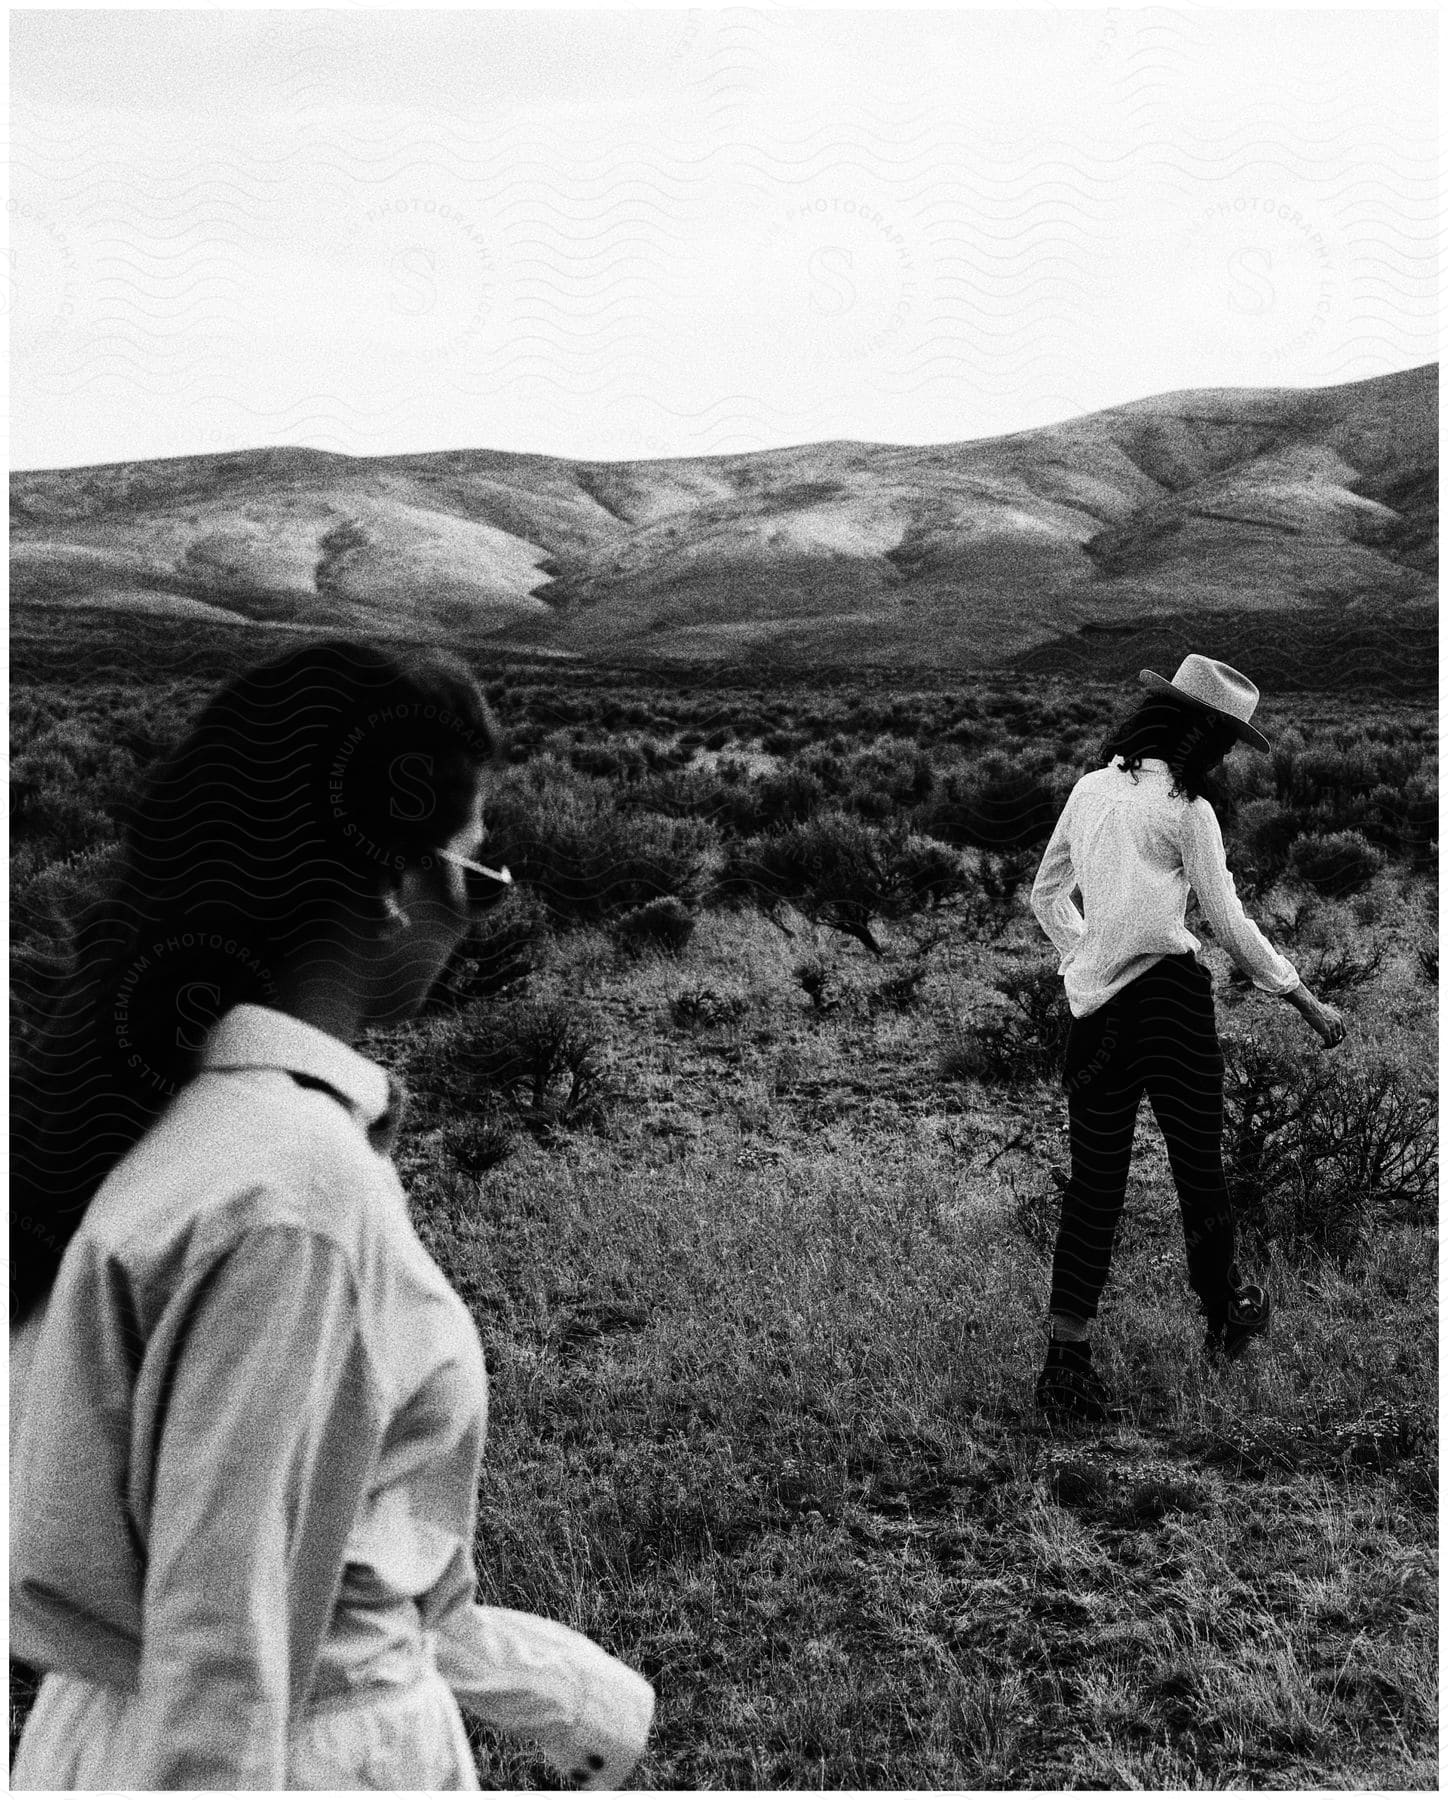 Two women walking in a grassy field with a mountain in the background captured in black and white